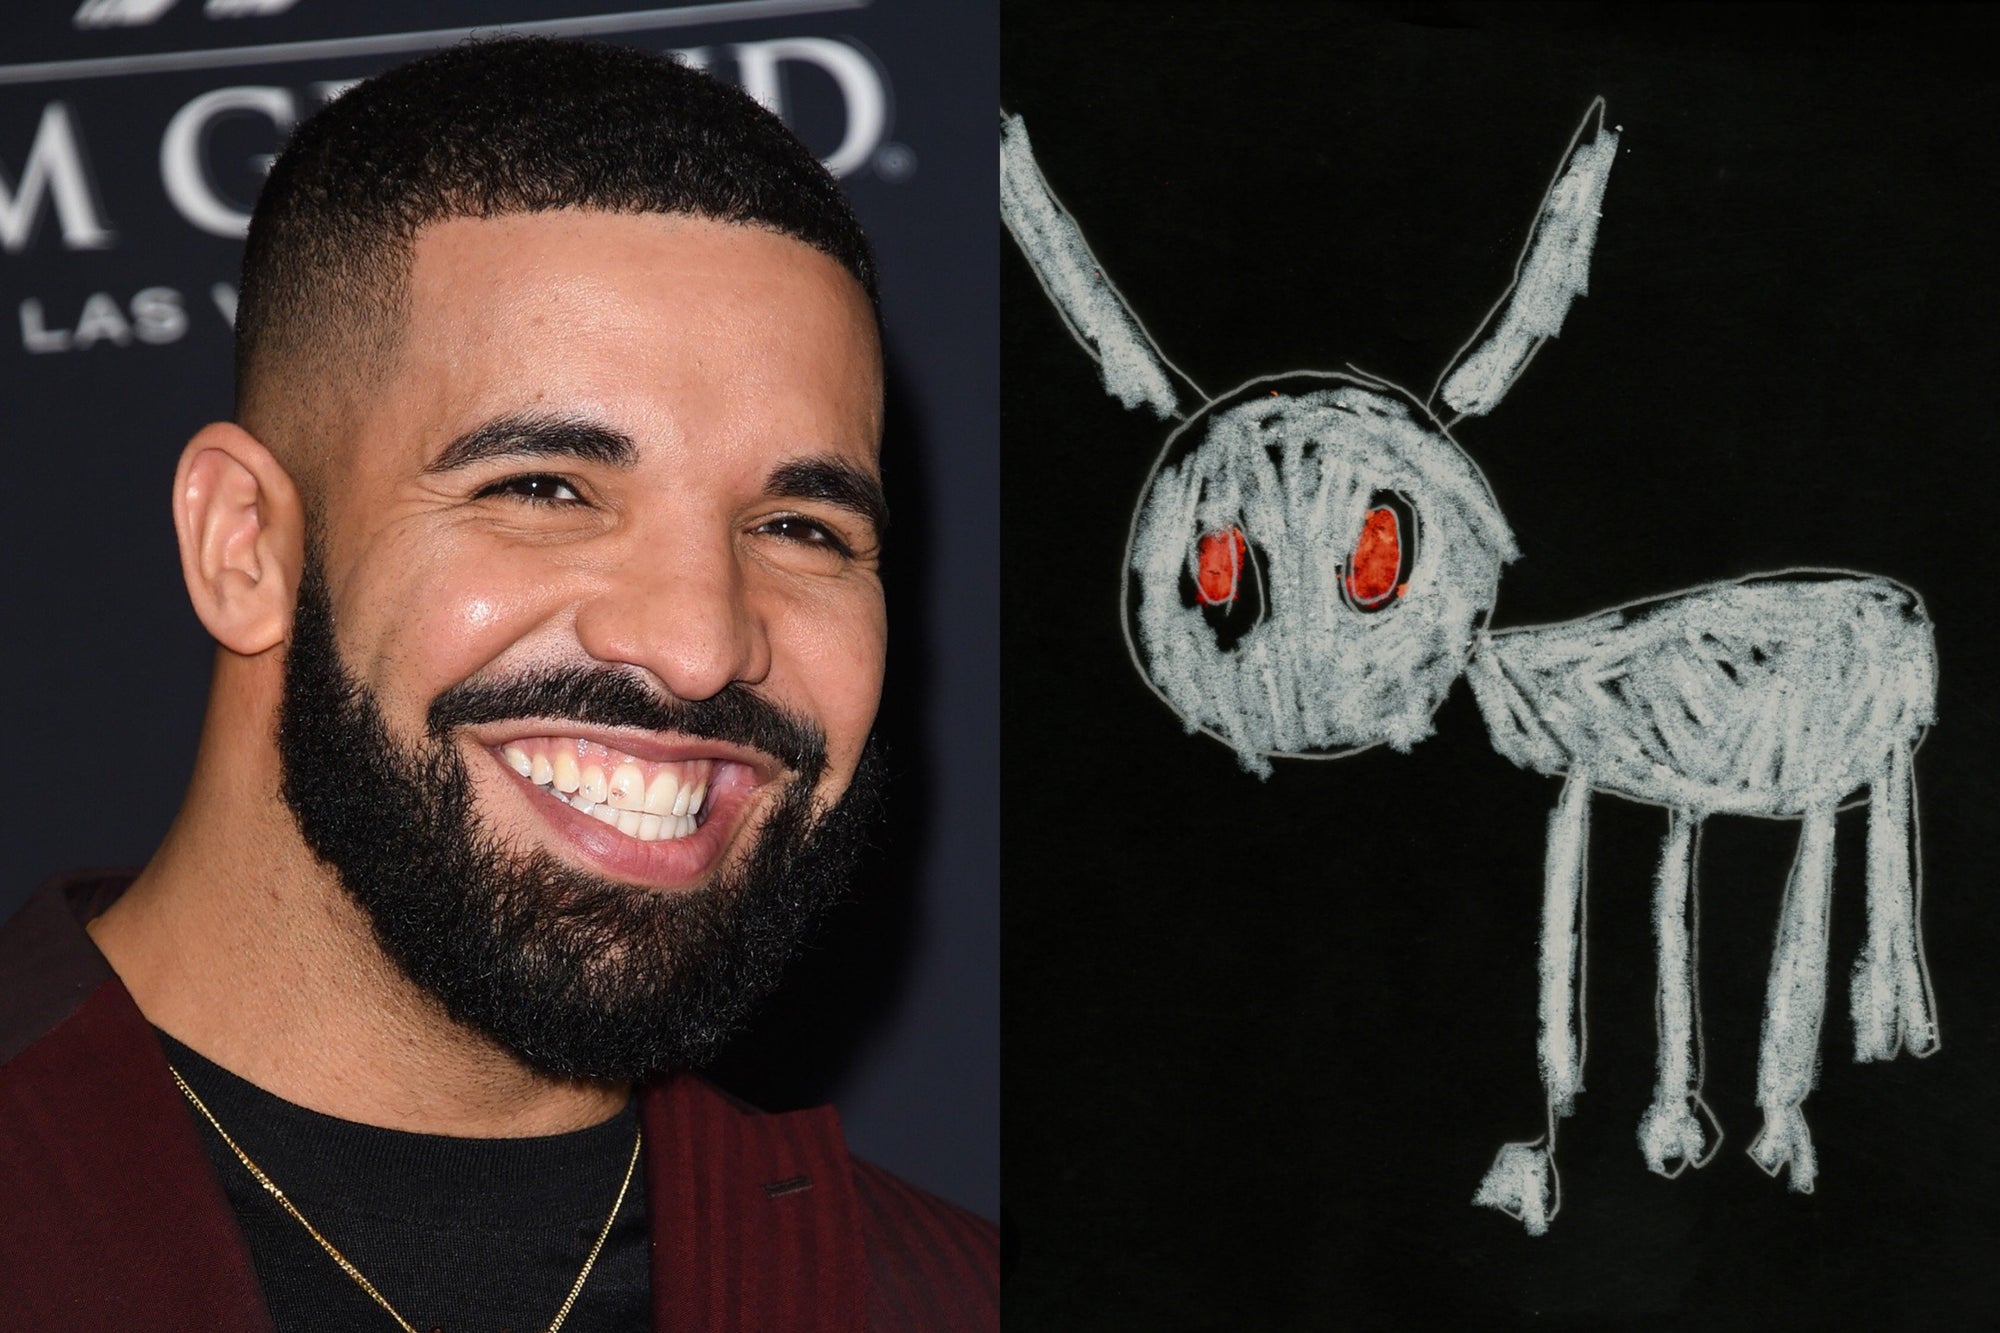 Drake Celebrates Album Release "For All The Dogs" with New 18-Carat Dog Bone Chain